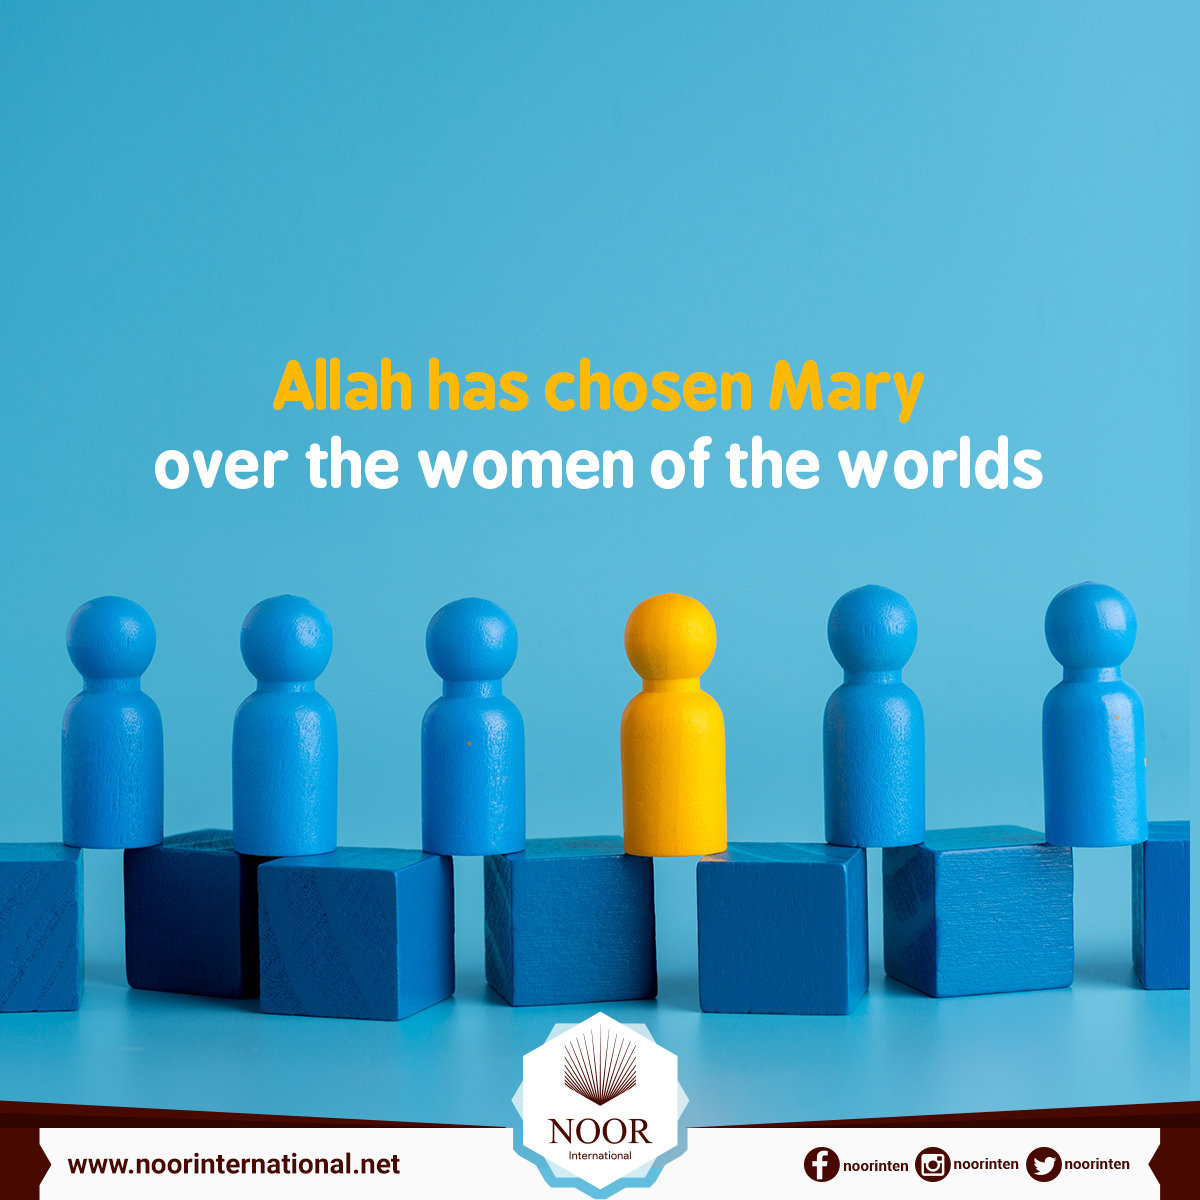 Allah has chosen Mary over the women of the worlds